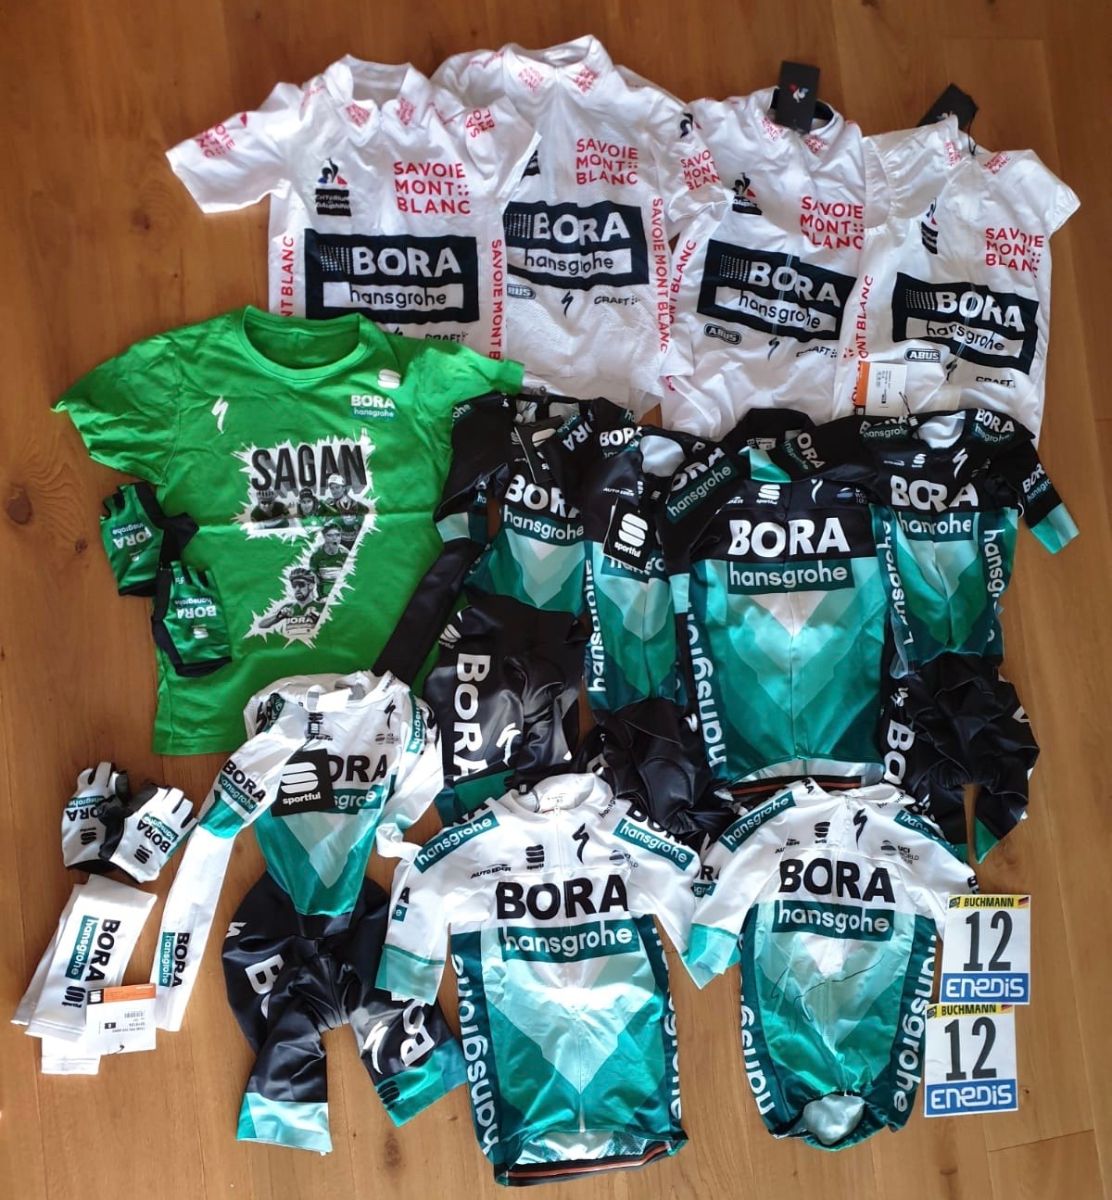 Do you want official gear from @EmuBuchmann? 🙌🏼 Over the next week we'll be making posts, allowing you 24h to say how much you'd donate to his Everest fundraiser for an item. The highest takes home the item! For all info: 🔗 instagram.com/borahansgrohe 🔗 facebook.com/borahansgroheo…